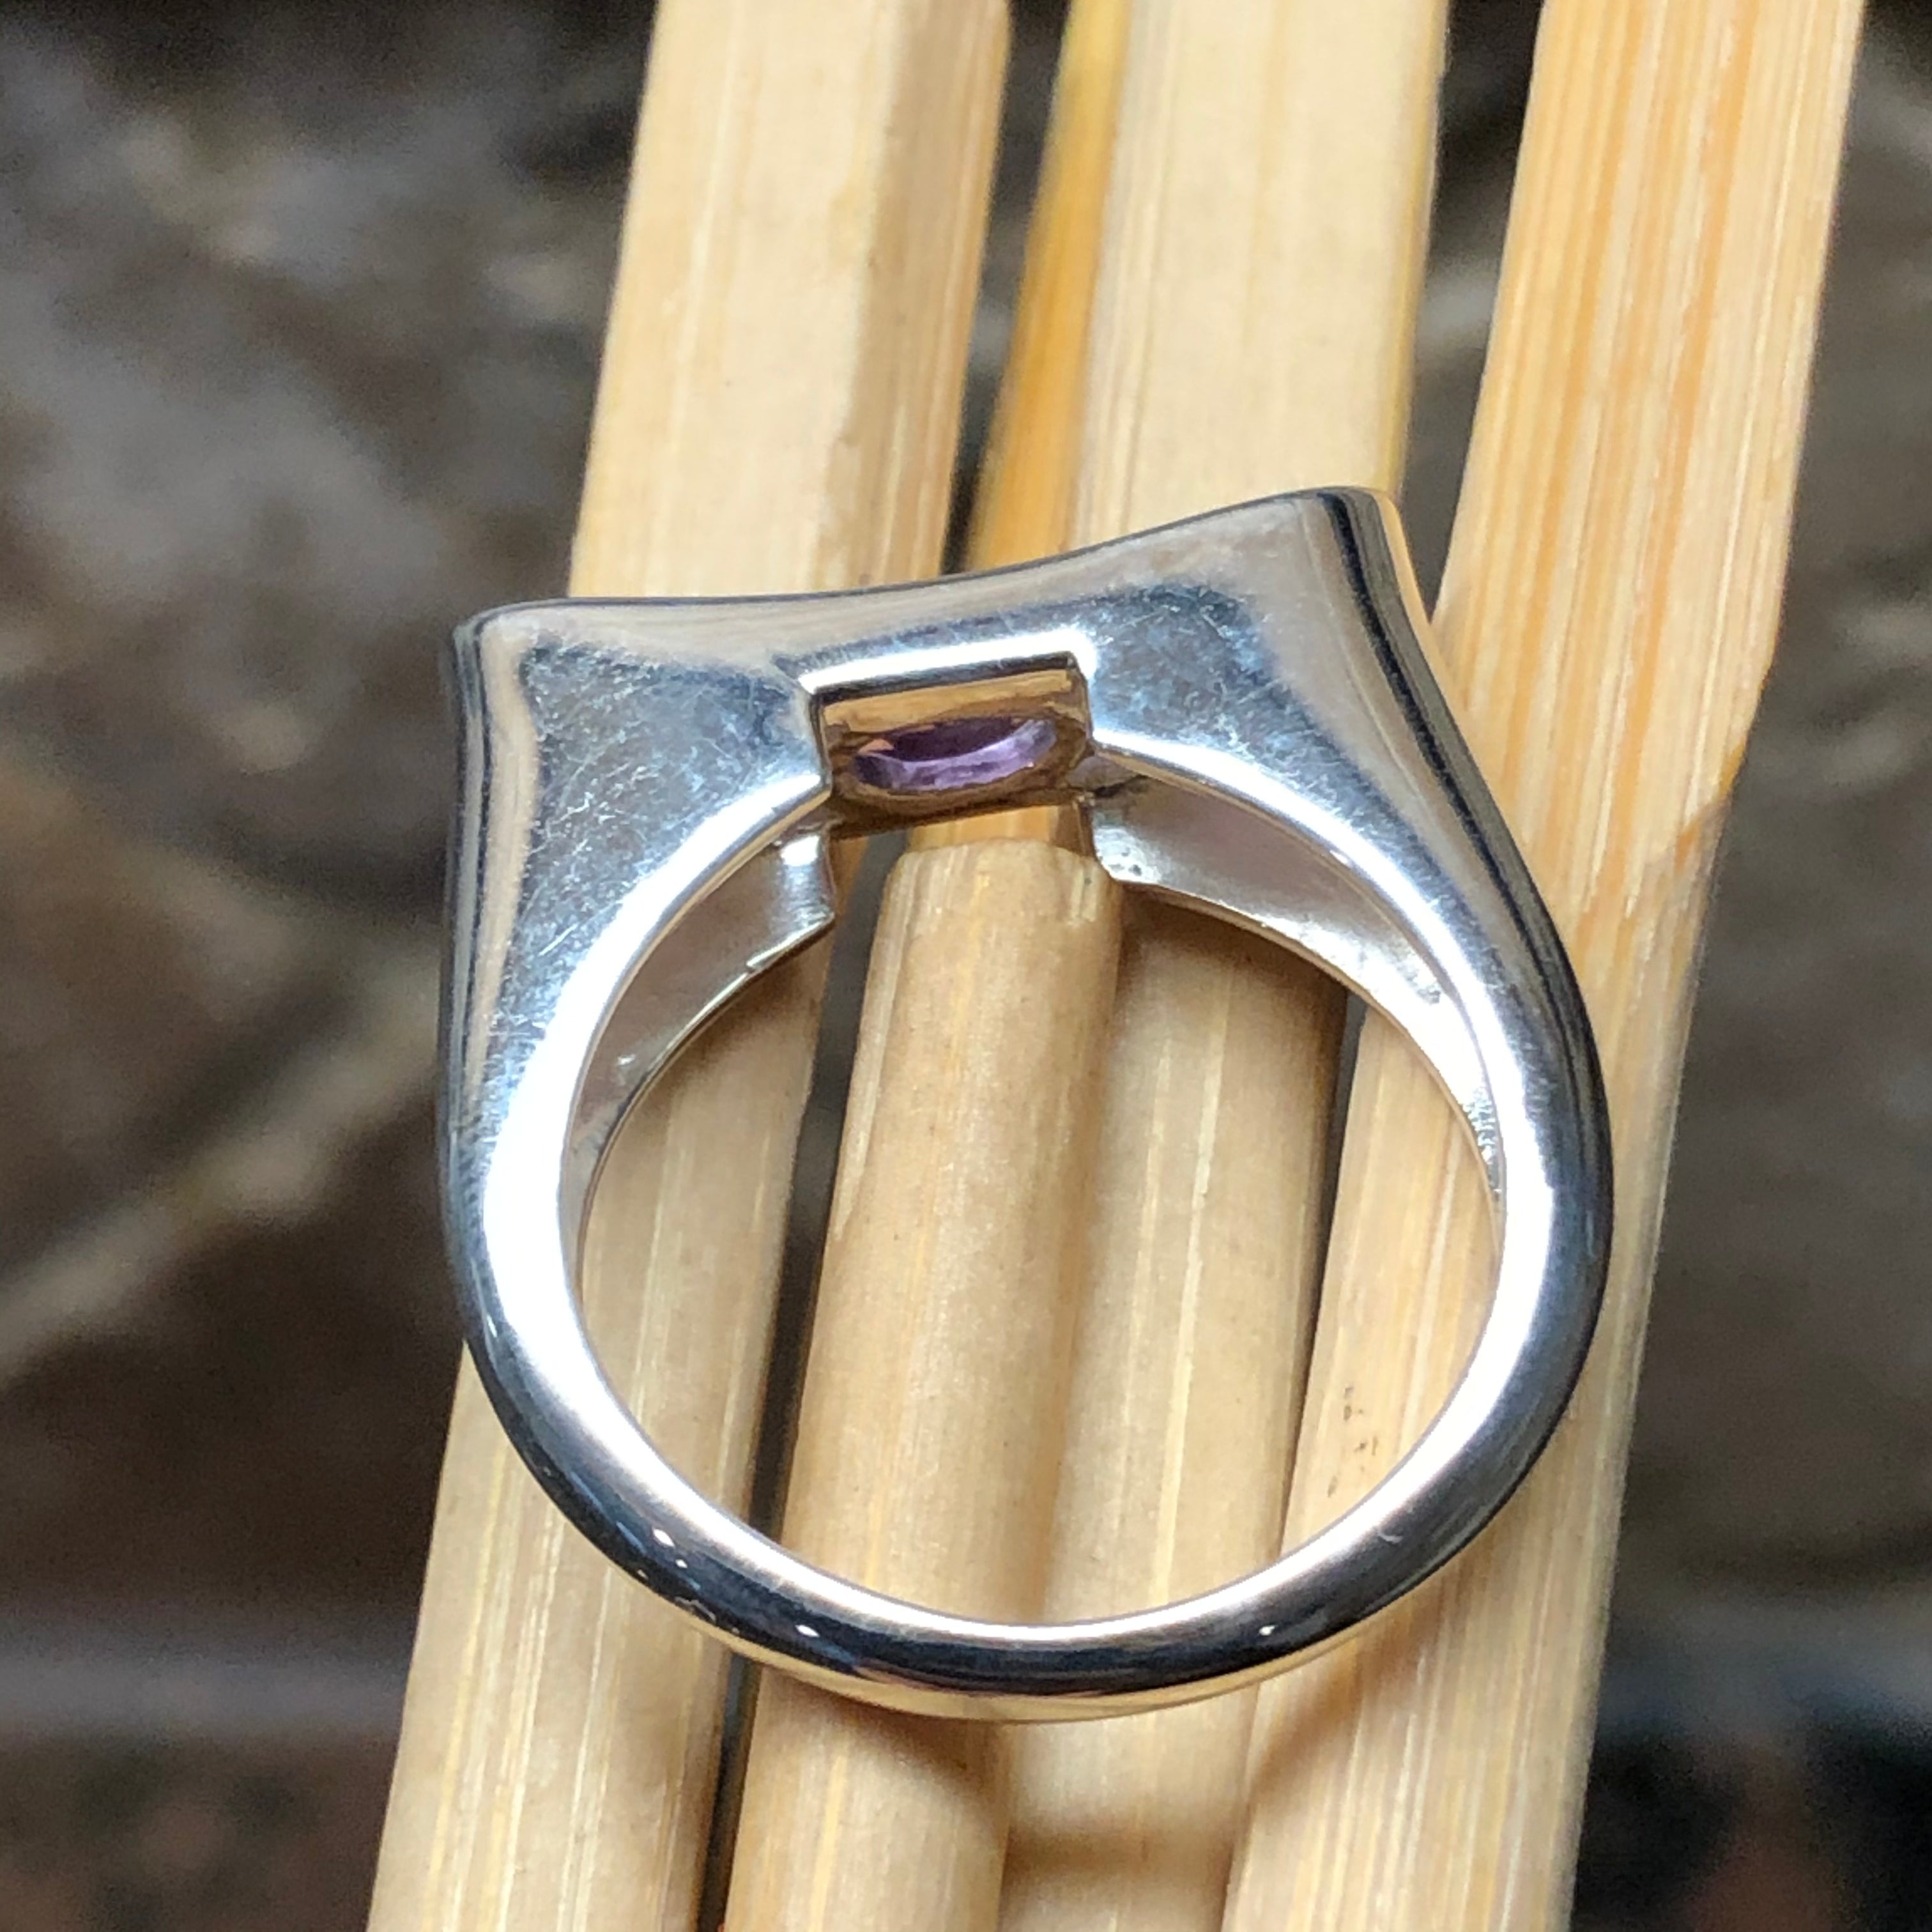 Natural Purple Amethyst 925 Solid Sterling Silver Ring Size 6, 7, 8, 9 - Natural Rocks by Kala